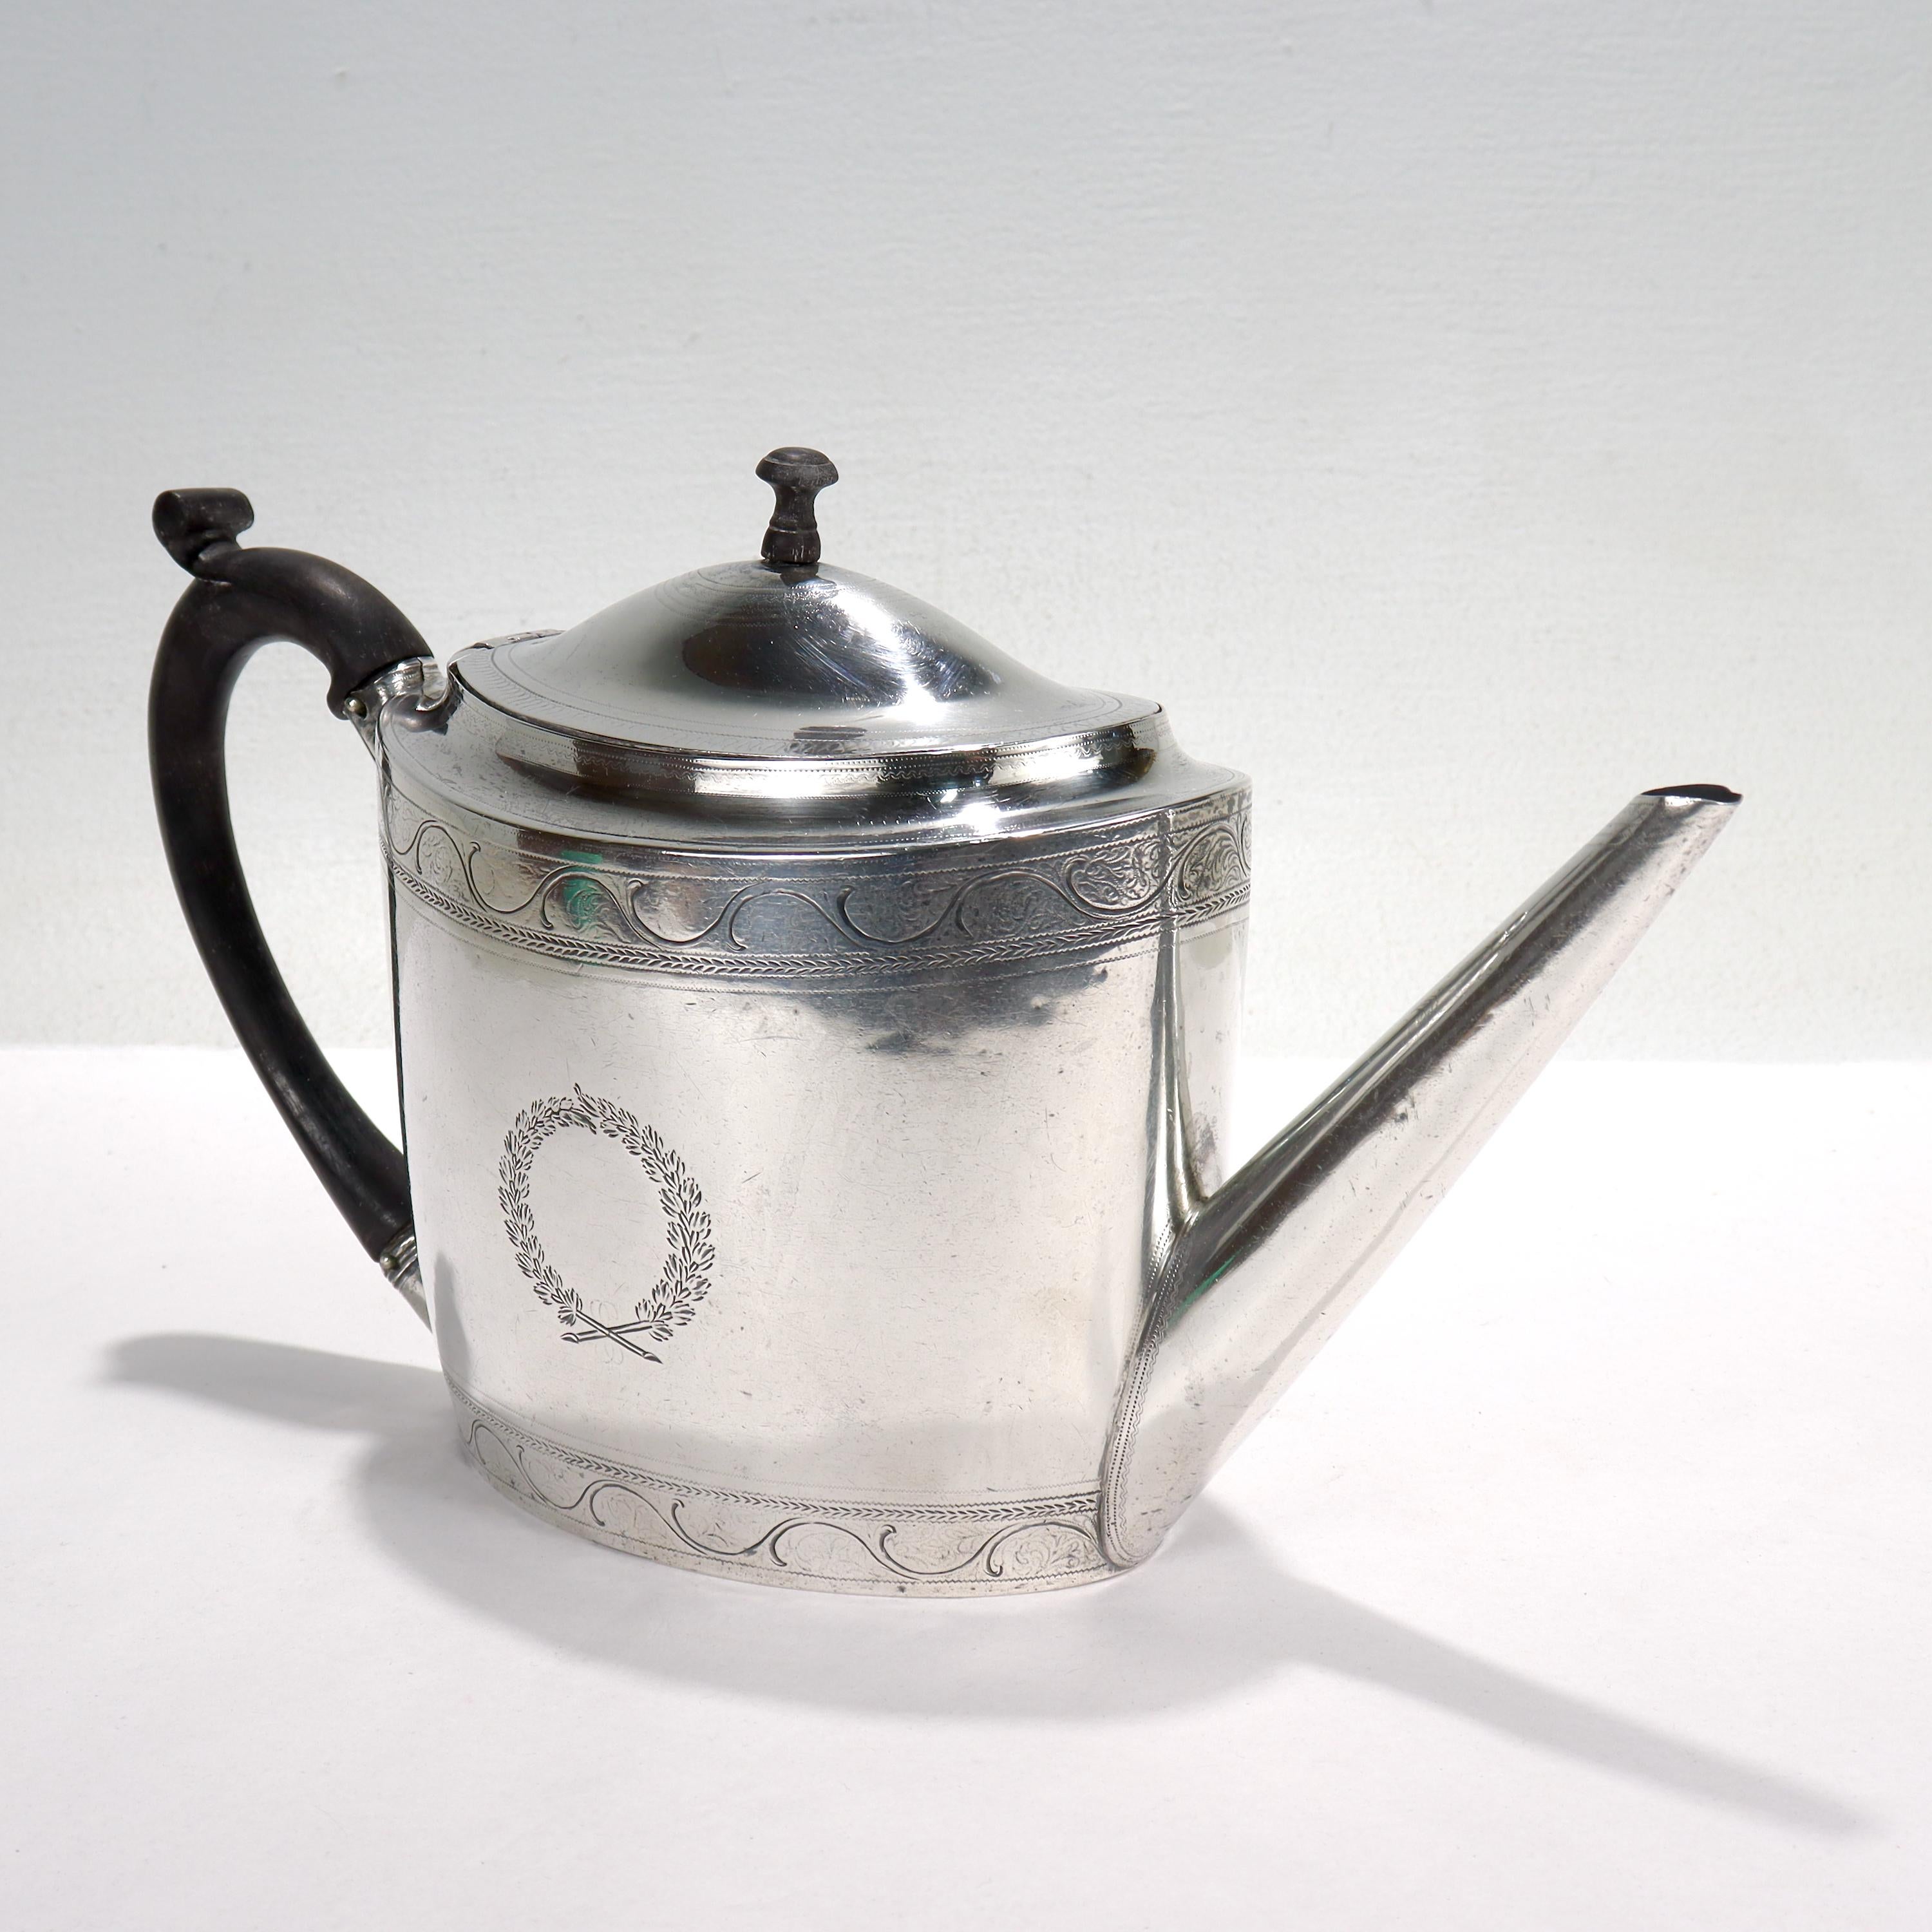 George III Antique 18th Century English Georgian Sterling Silver Teapot by Chawmer & Eames